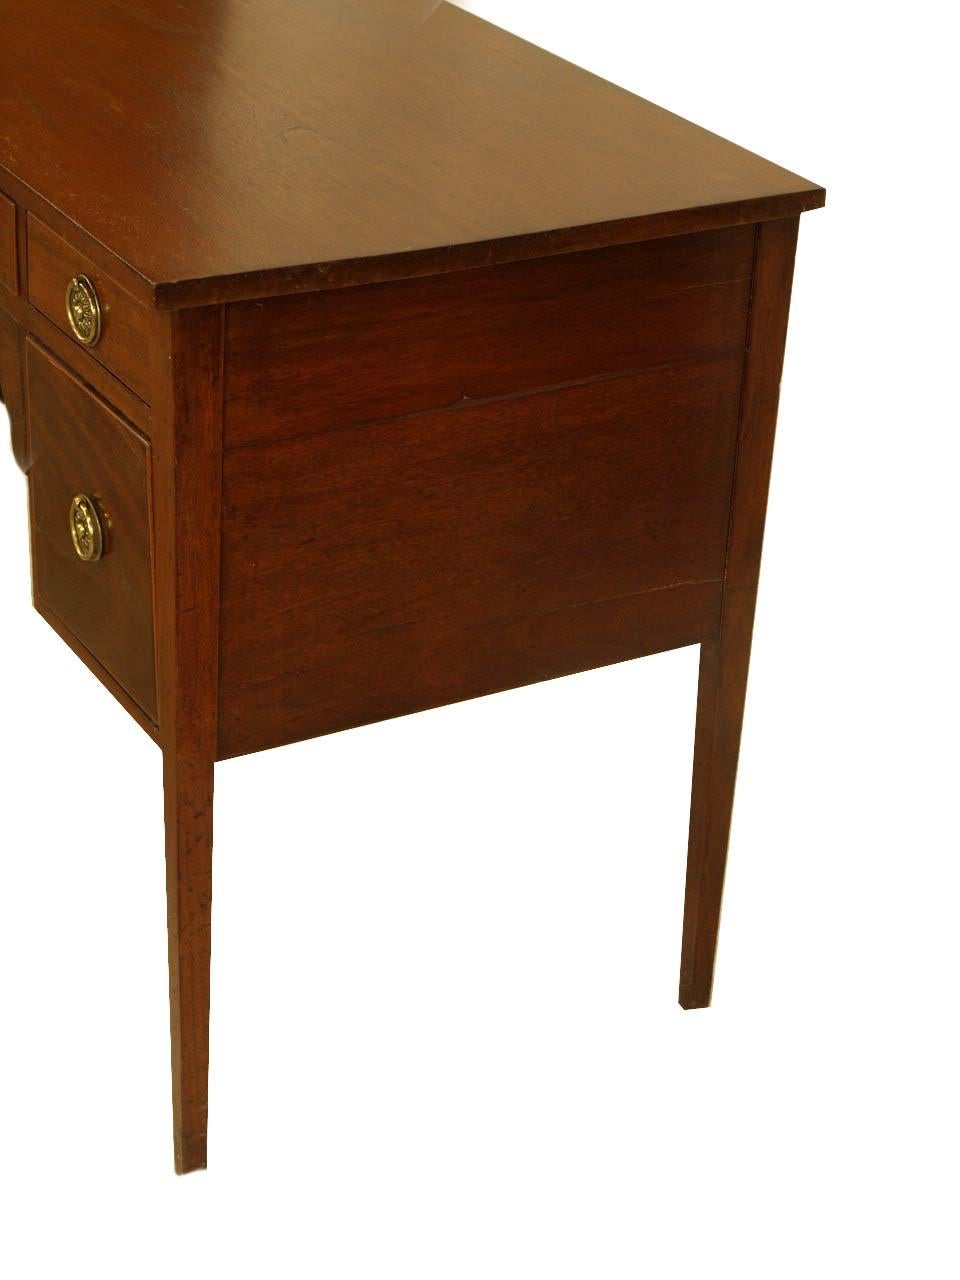 Hepplewhite mahogany server, the five drawers with round ring pulls are flanking the center with a nicely arched apron, the drawers are banded around the edges with boxwood. This petite server with tapered legs has a very nice patina and color.